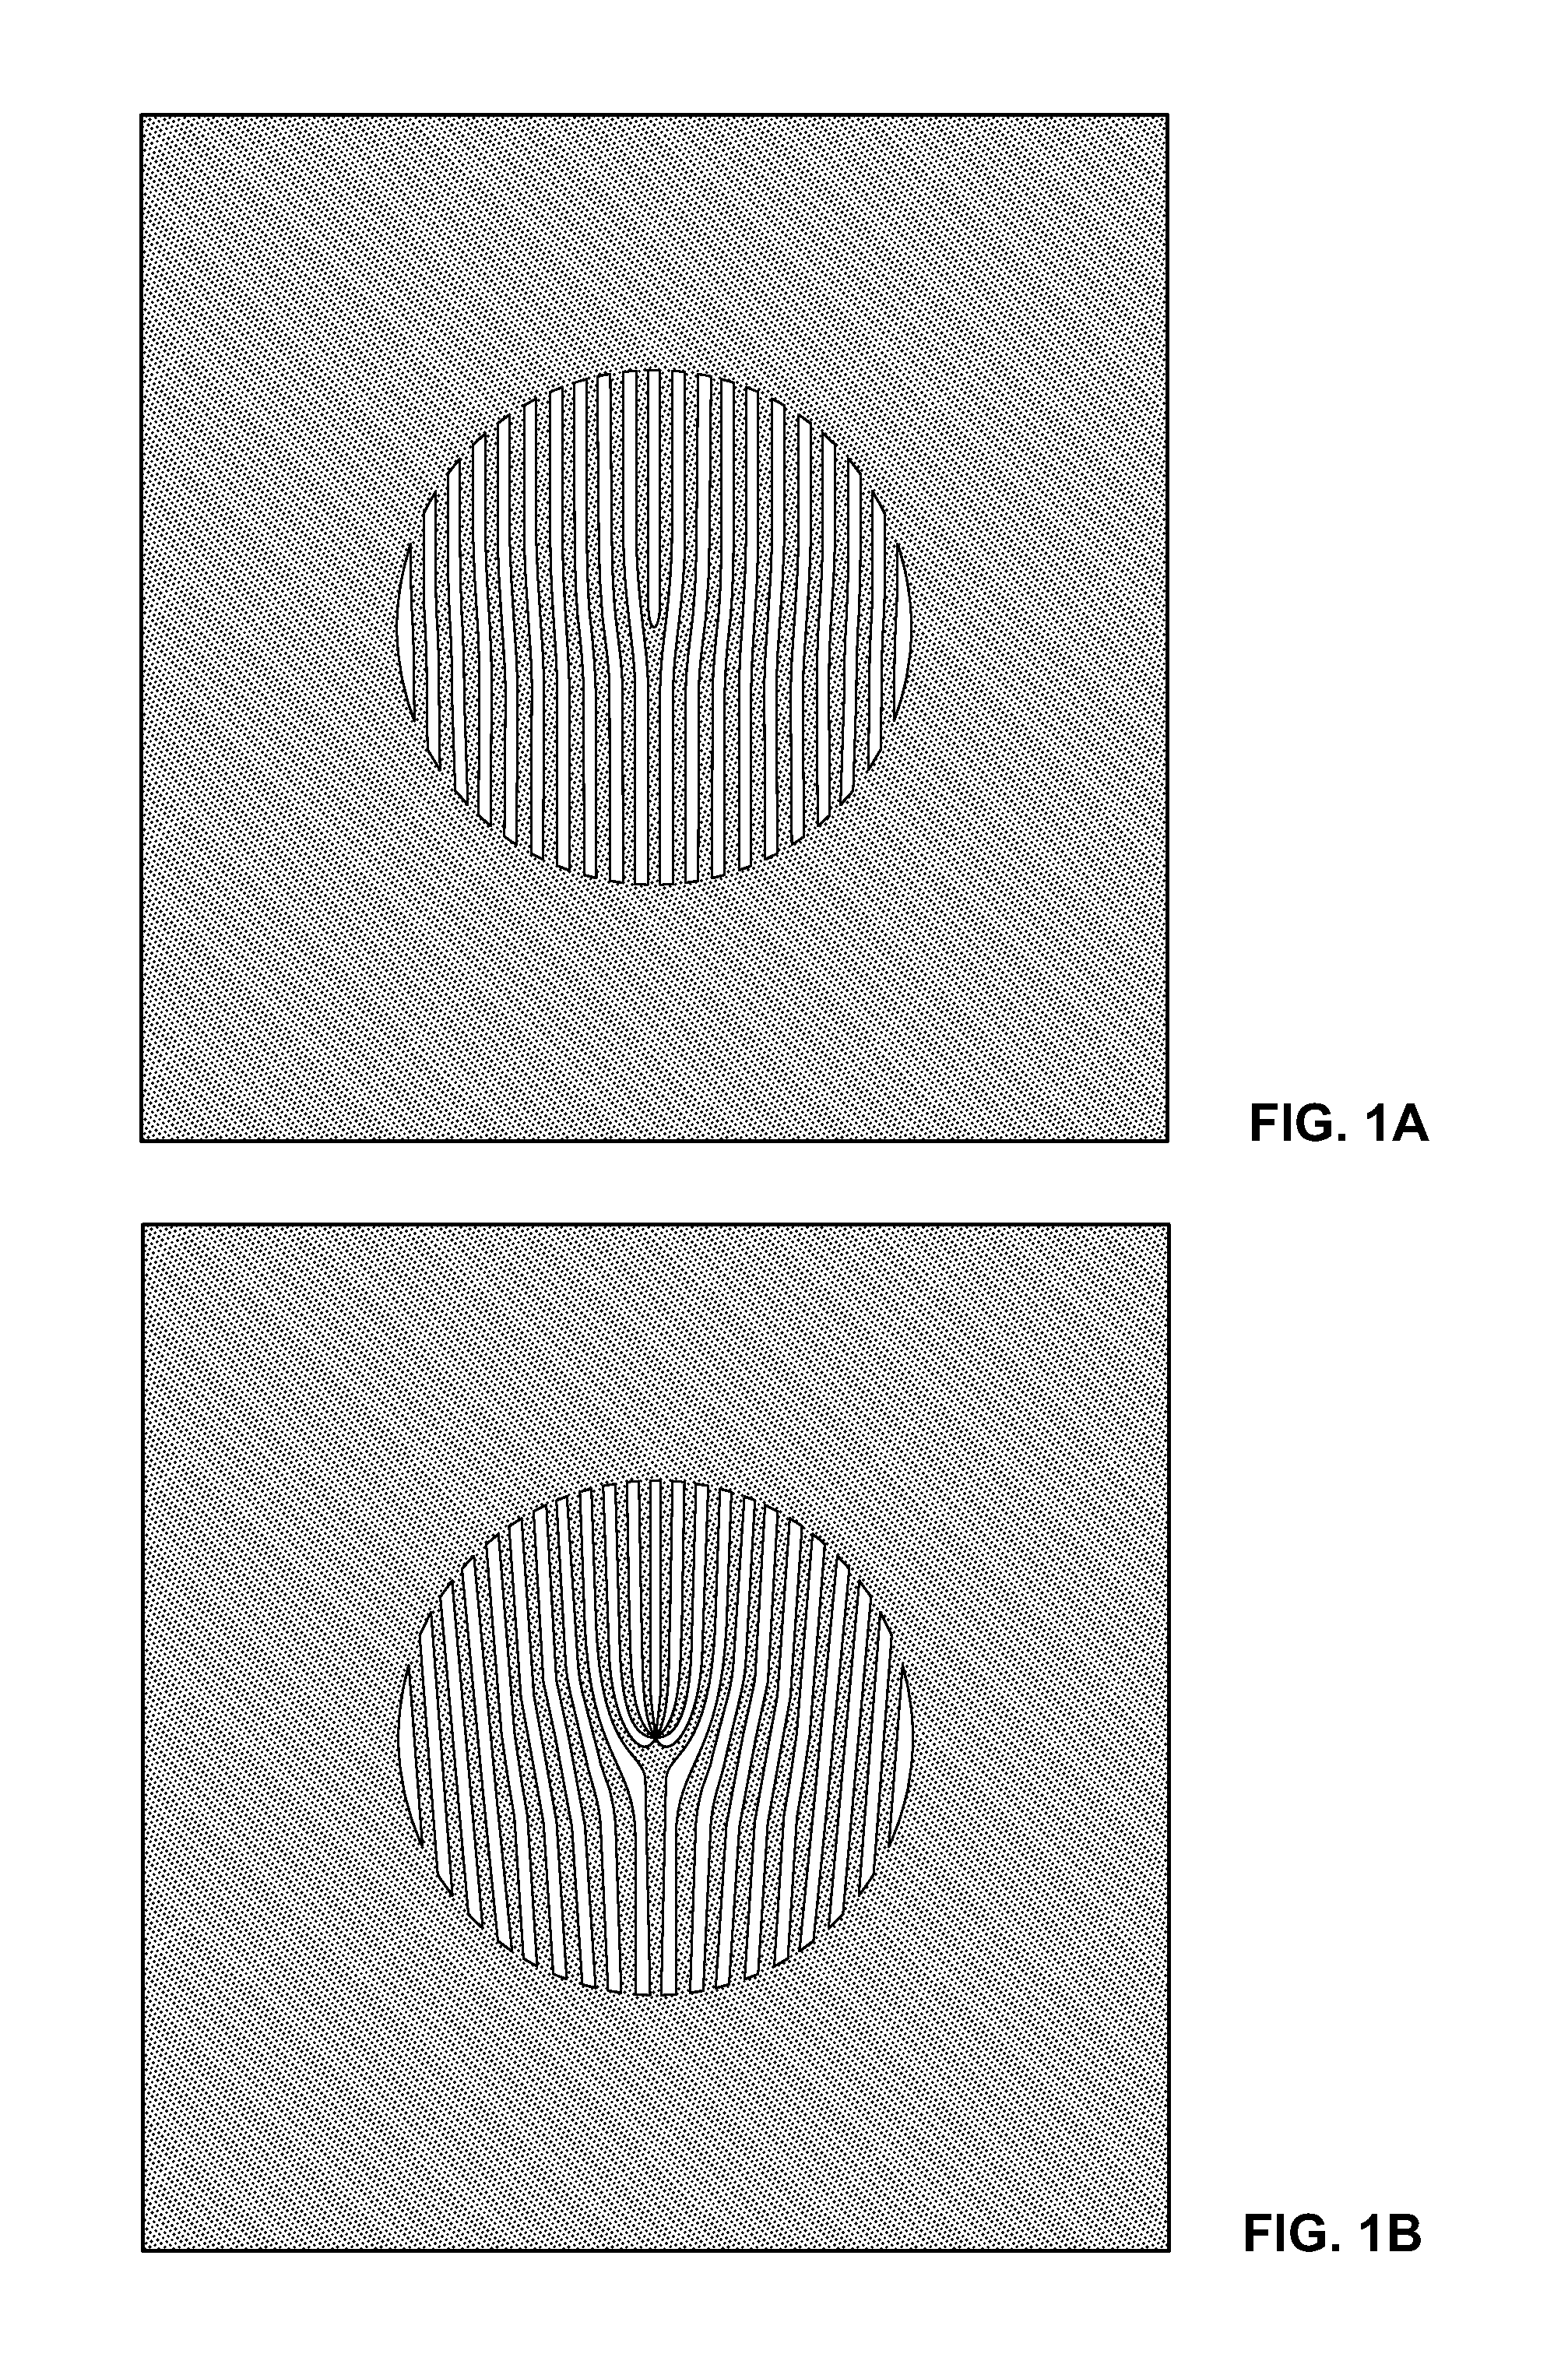 System and method for producing and using multiple electron beams with quantized orbital angular momentum in an electron microscope